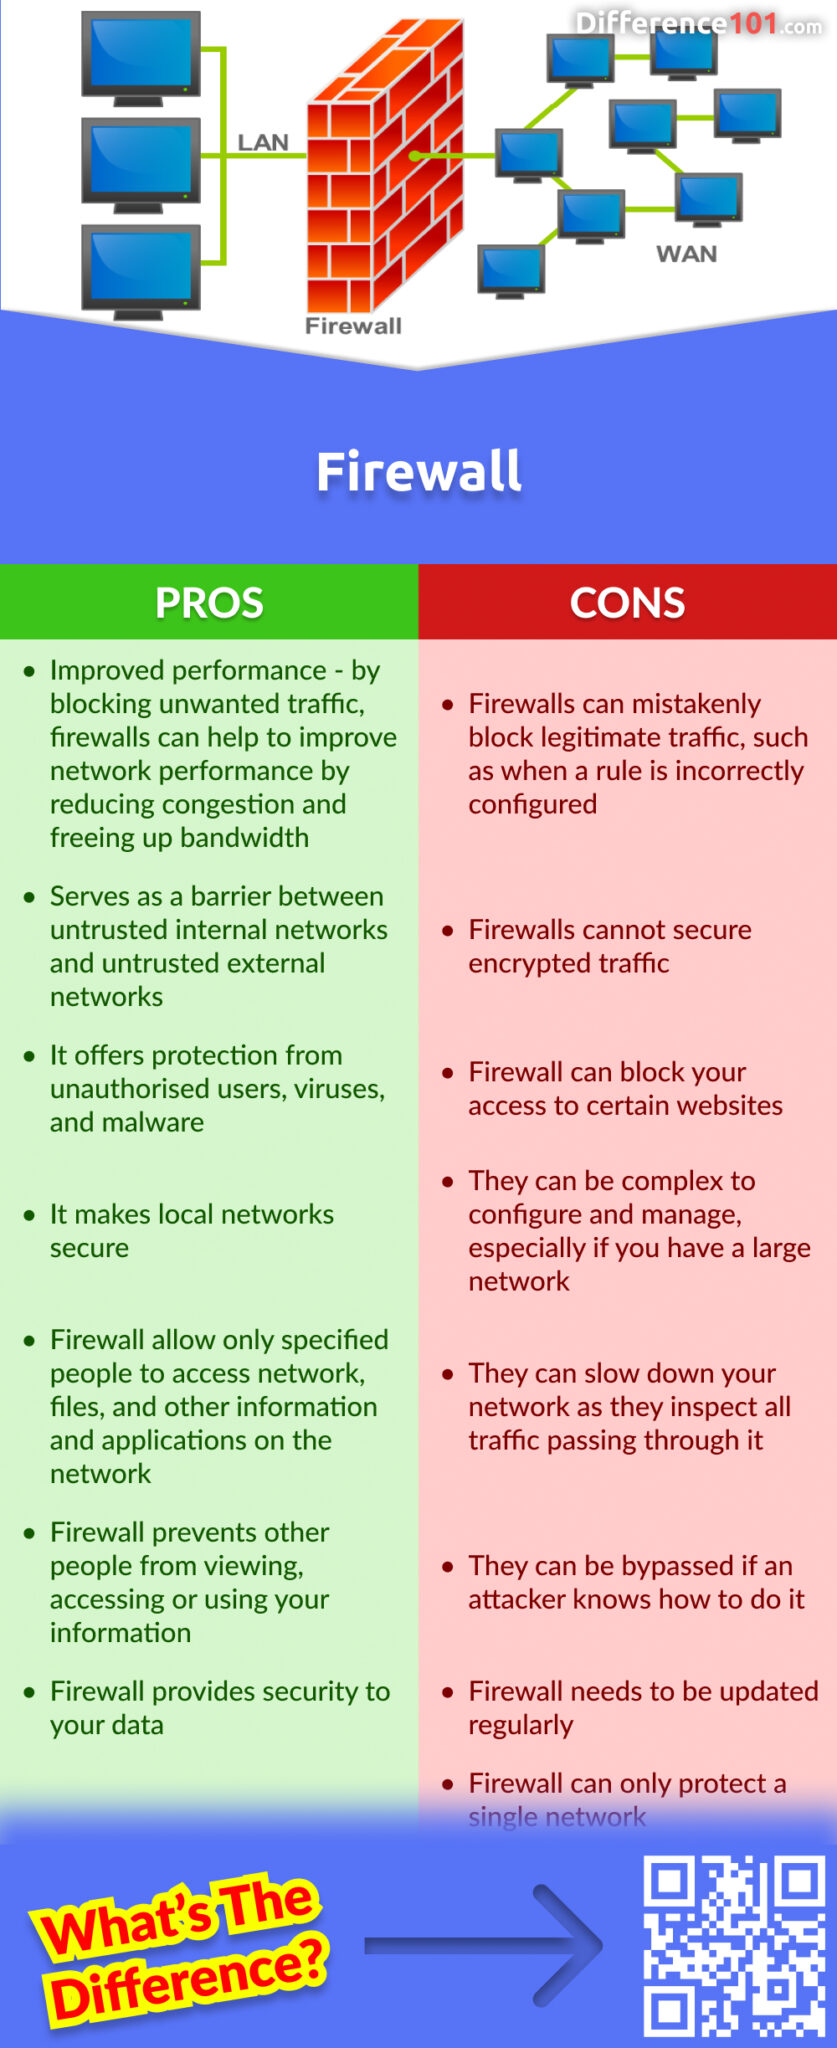 Firewall Pros & Cons